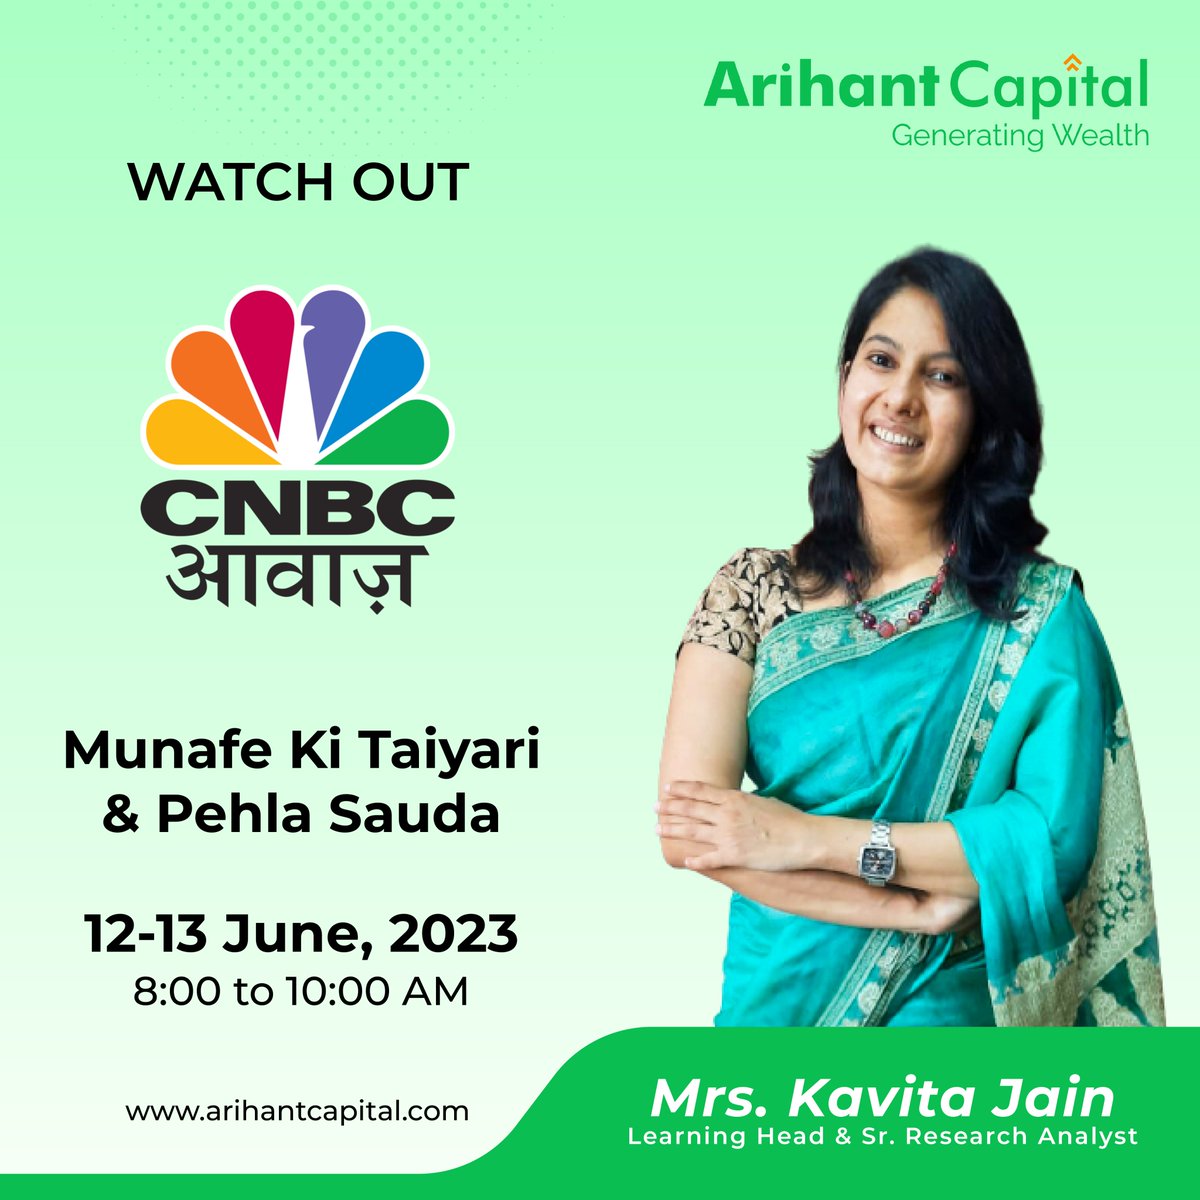 Join us #live on @CNBC_Awaaz. Watch out for market and #stock outlook with Mrs Kavita Jain - Learning Head & Sr. Research Analyst, Arihant Capital. Find the Weekly Schedule show #MunafeKiTaiyari & #PehlaSauda

Open a #Demat account online: bit.ly/3LNfMwE

#Research